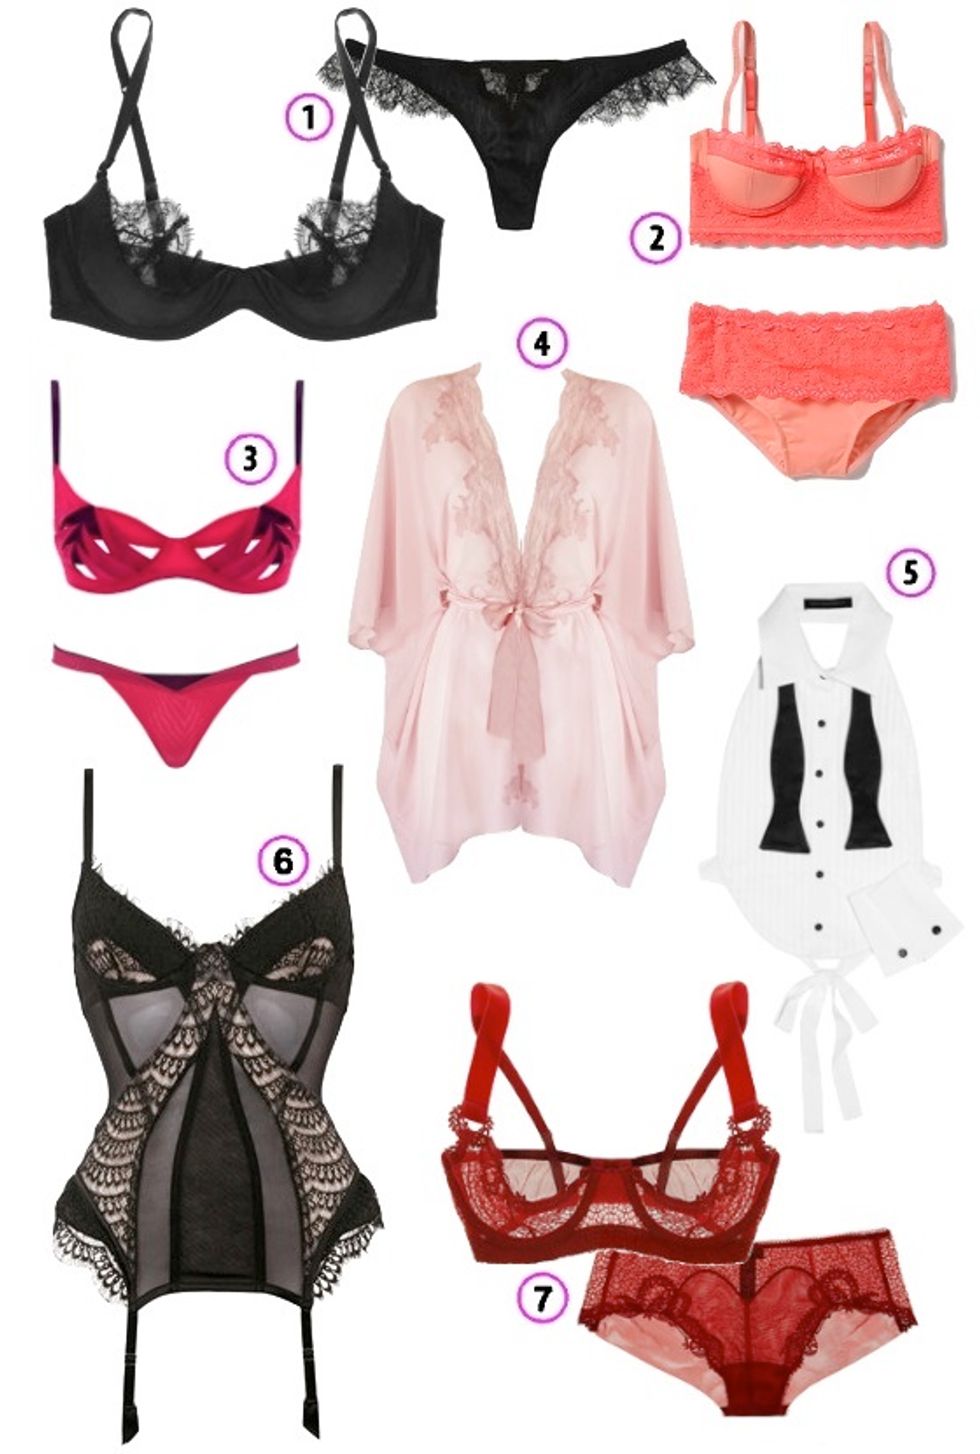 Look of the Week: The Best Lingerie for Valentine's Day